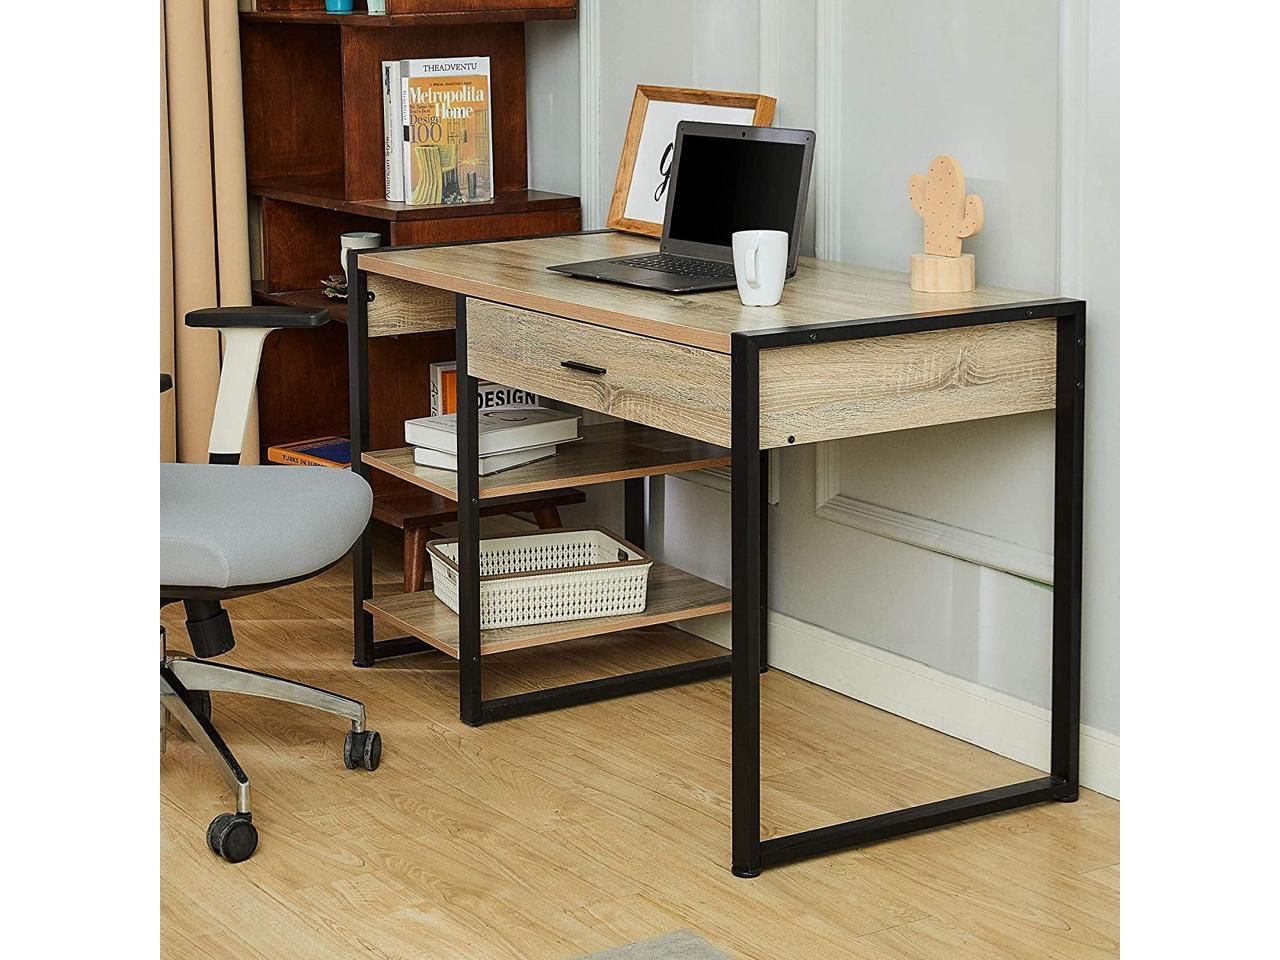 Co Z 47" Industrial Computer Desk W Drawer, 3 Prong Outlet, 2 Usb Ports For Acacia Wood Writing Desks With Usb Ports (View 11 of 15)